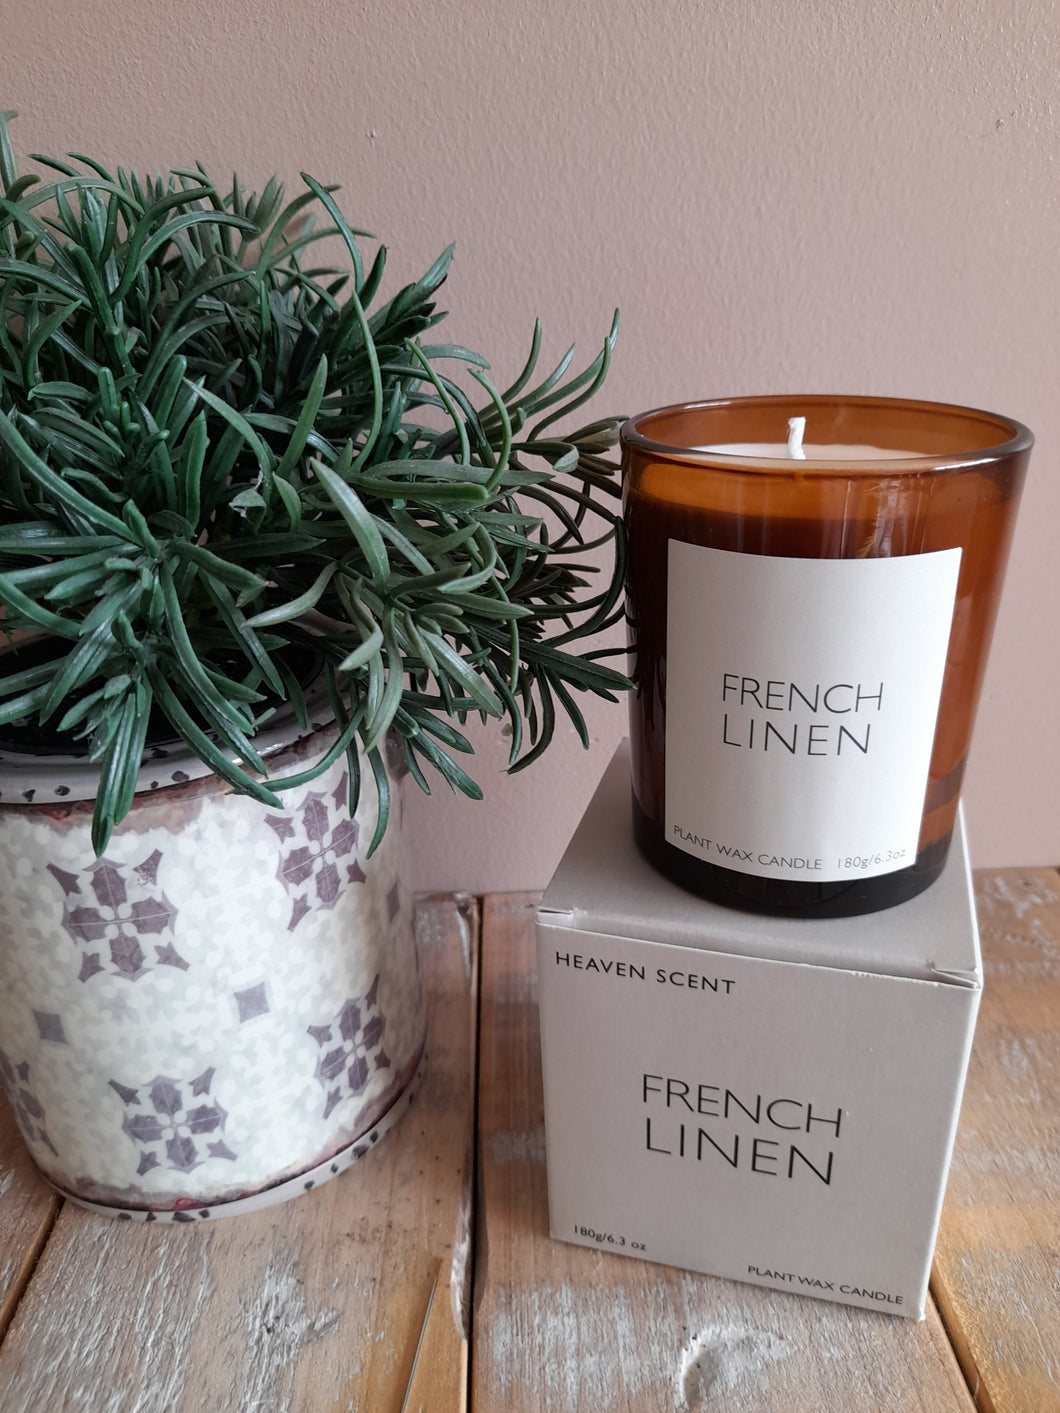 Heaven scent - French Linen candle